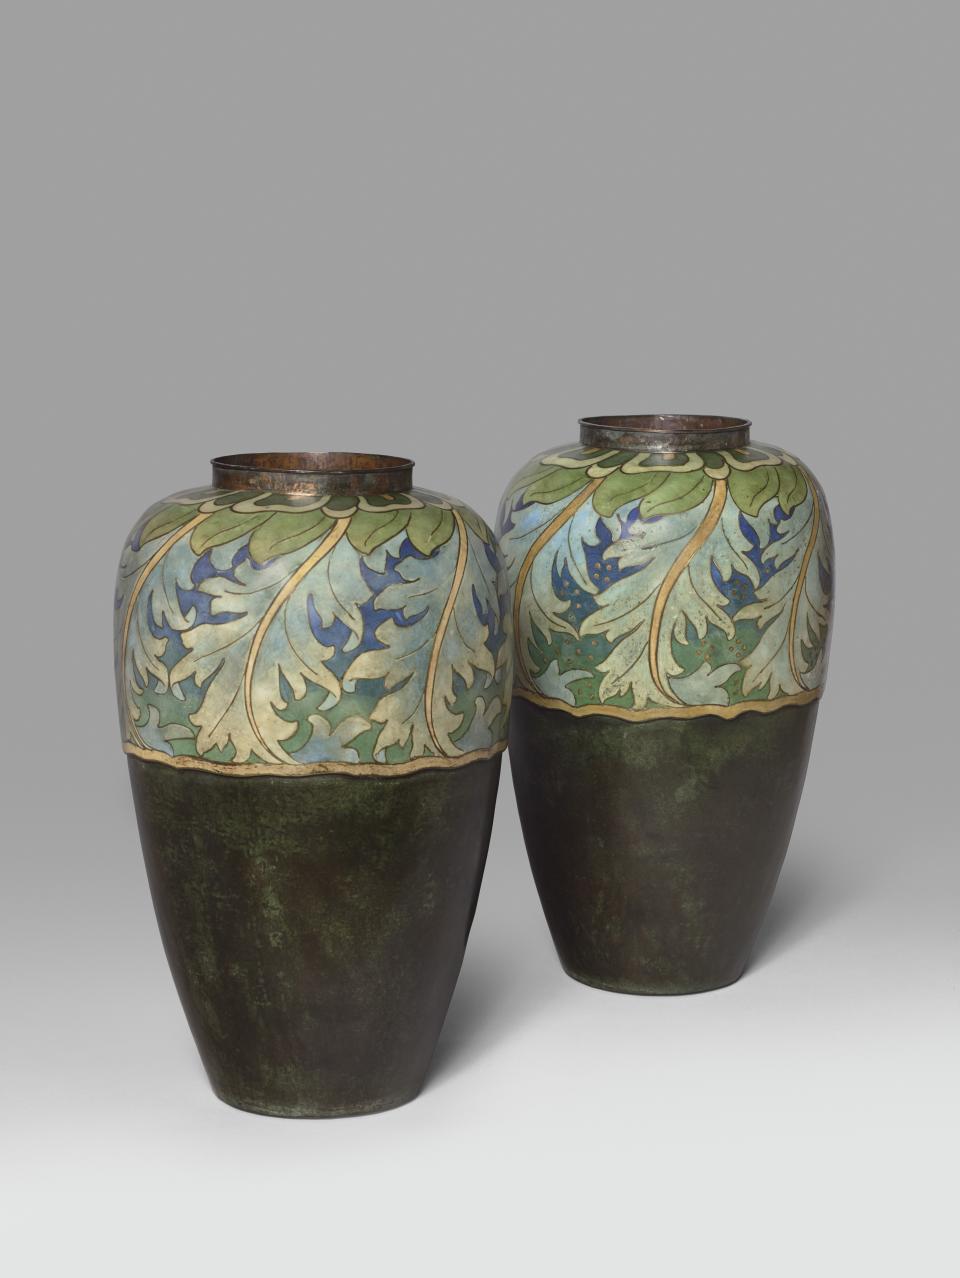 Two 1896 Swiss vases by Clement Heaton will be on view at PAD Paris.